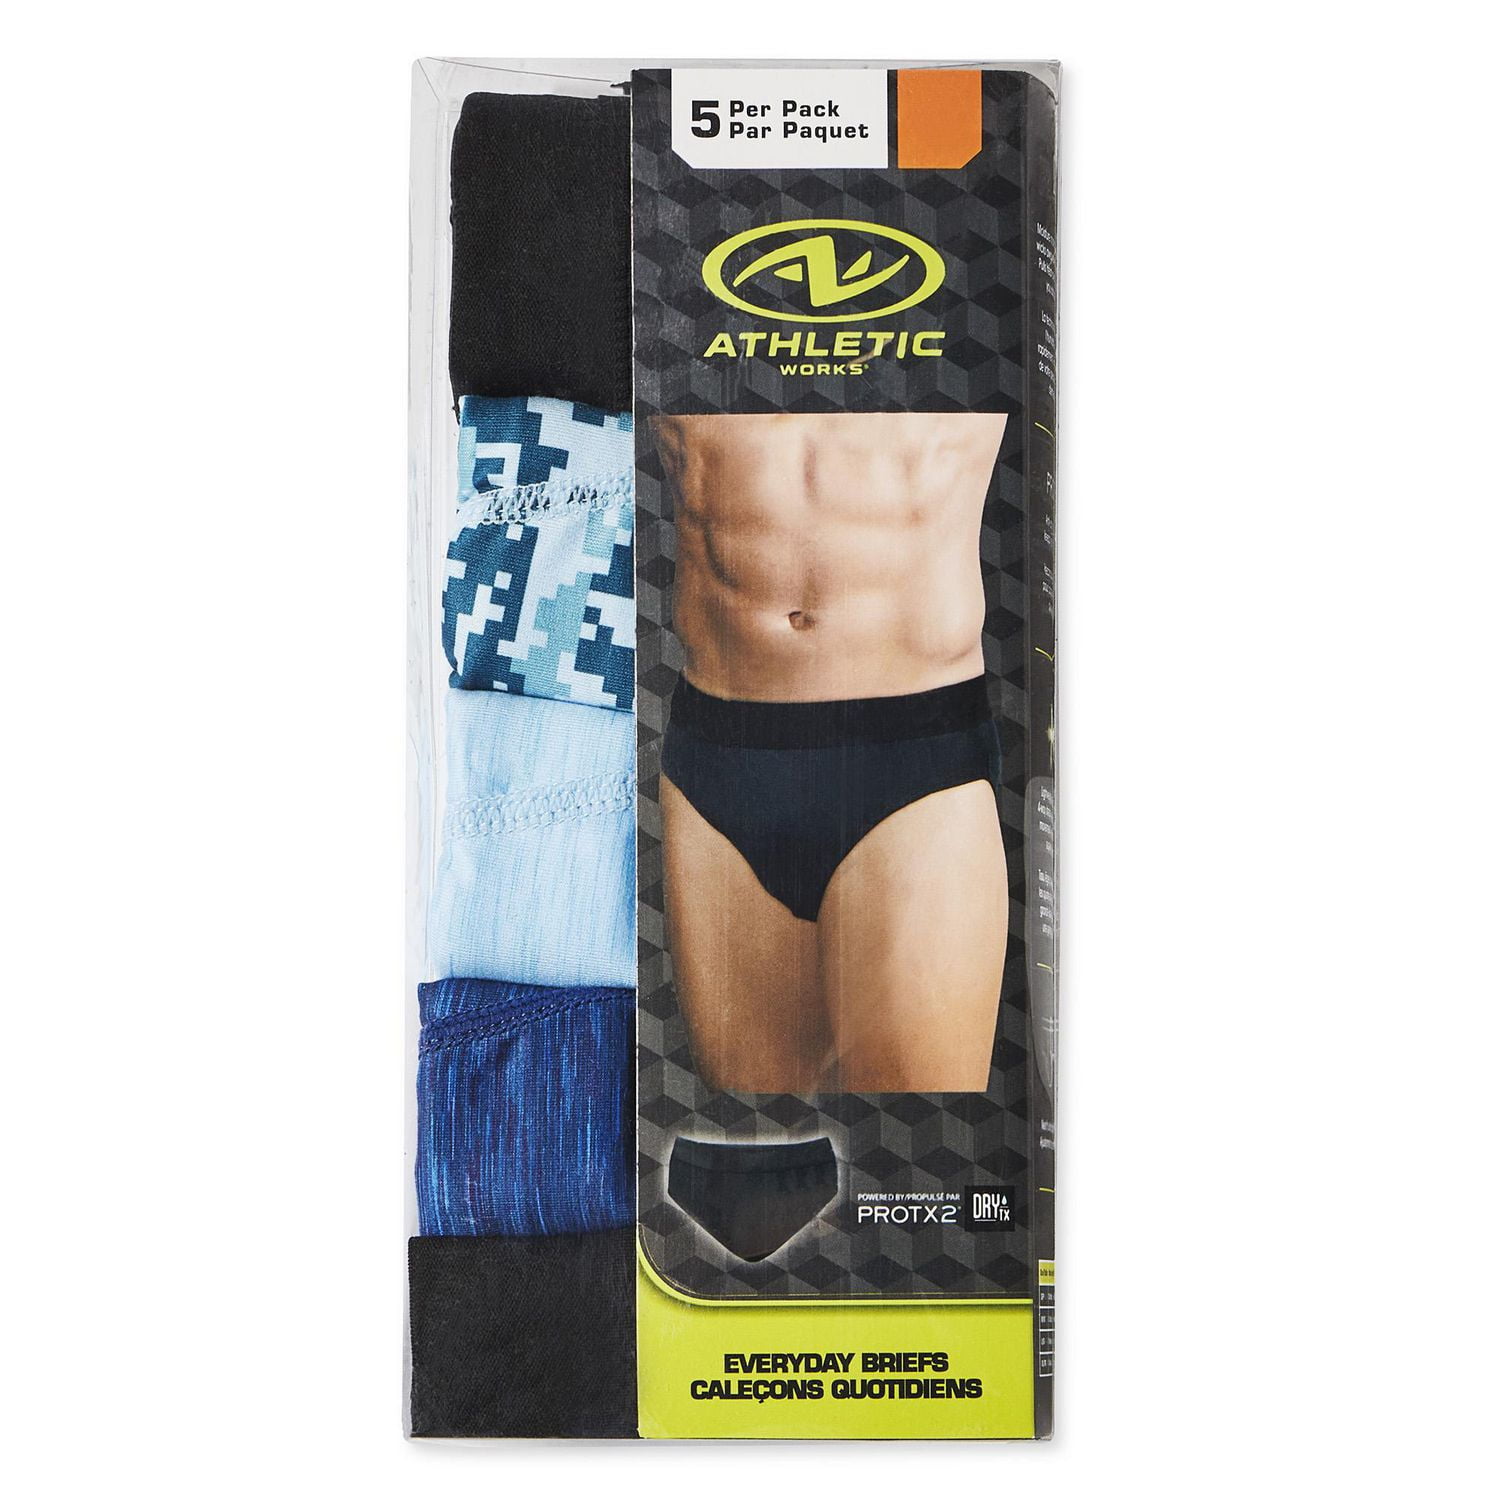 You'll find this underwear is a highly durable choice that can keep up with  any sport or athletic activity.🏌️🚴 🩲Link in bio